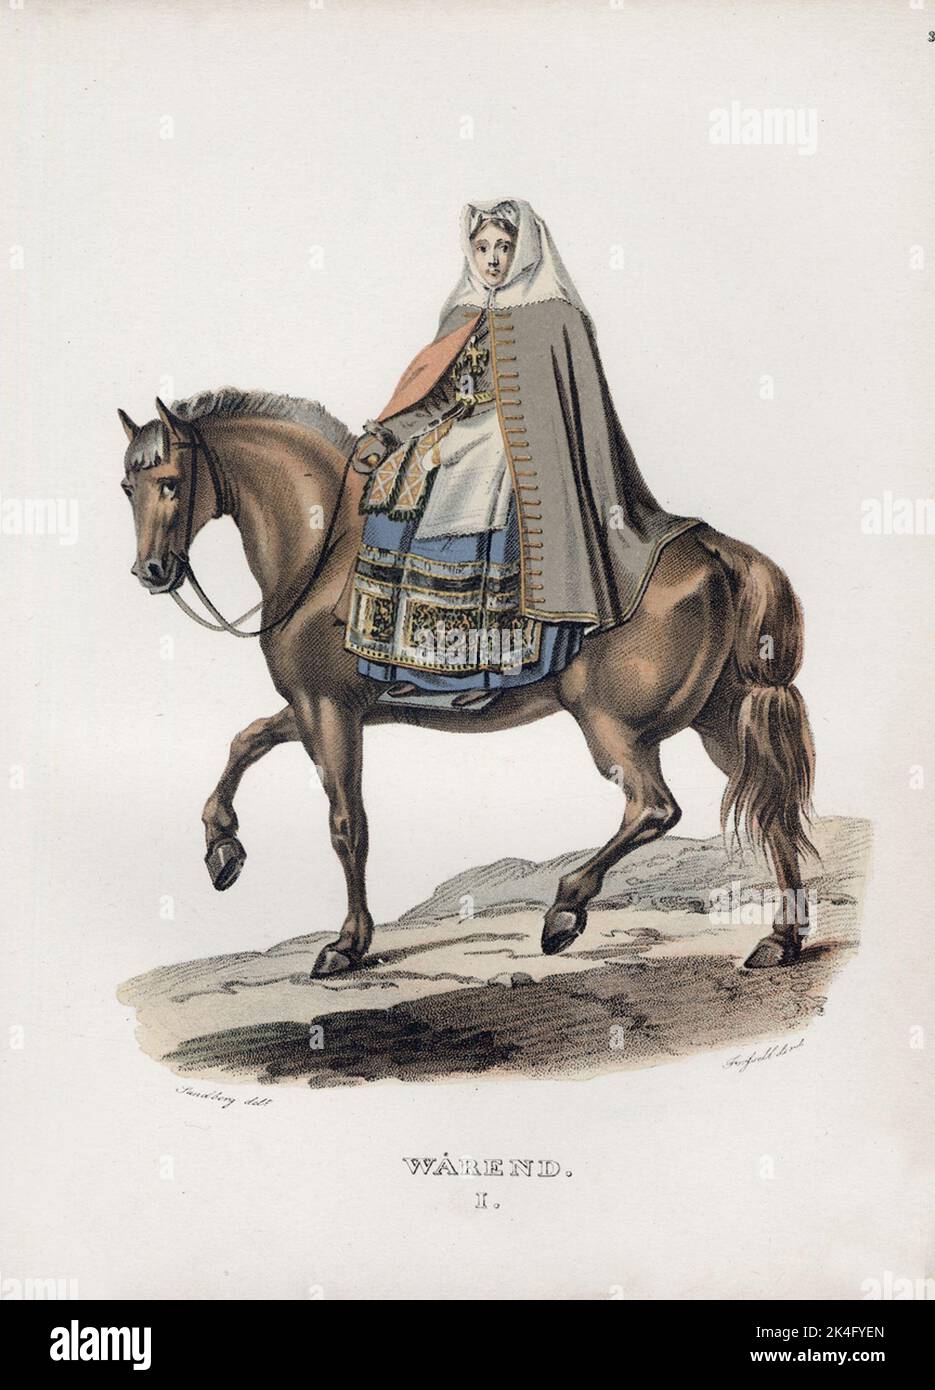 A festive woman from Värend in Småland wearing a foot -side sleeveless coat of old -fashioned cut riding on a horse. Drawing by J. G. Sandberg for the image 'One year in Sweden' (1827). Nordic Stock Photo